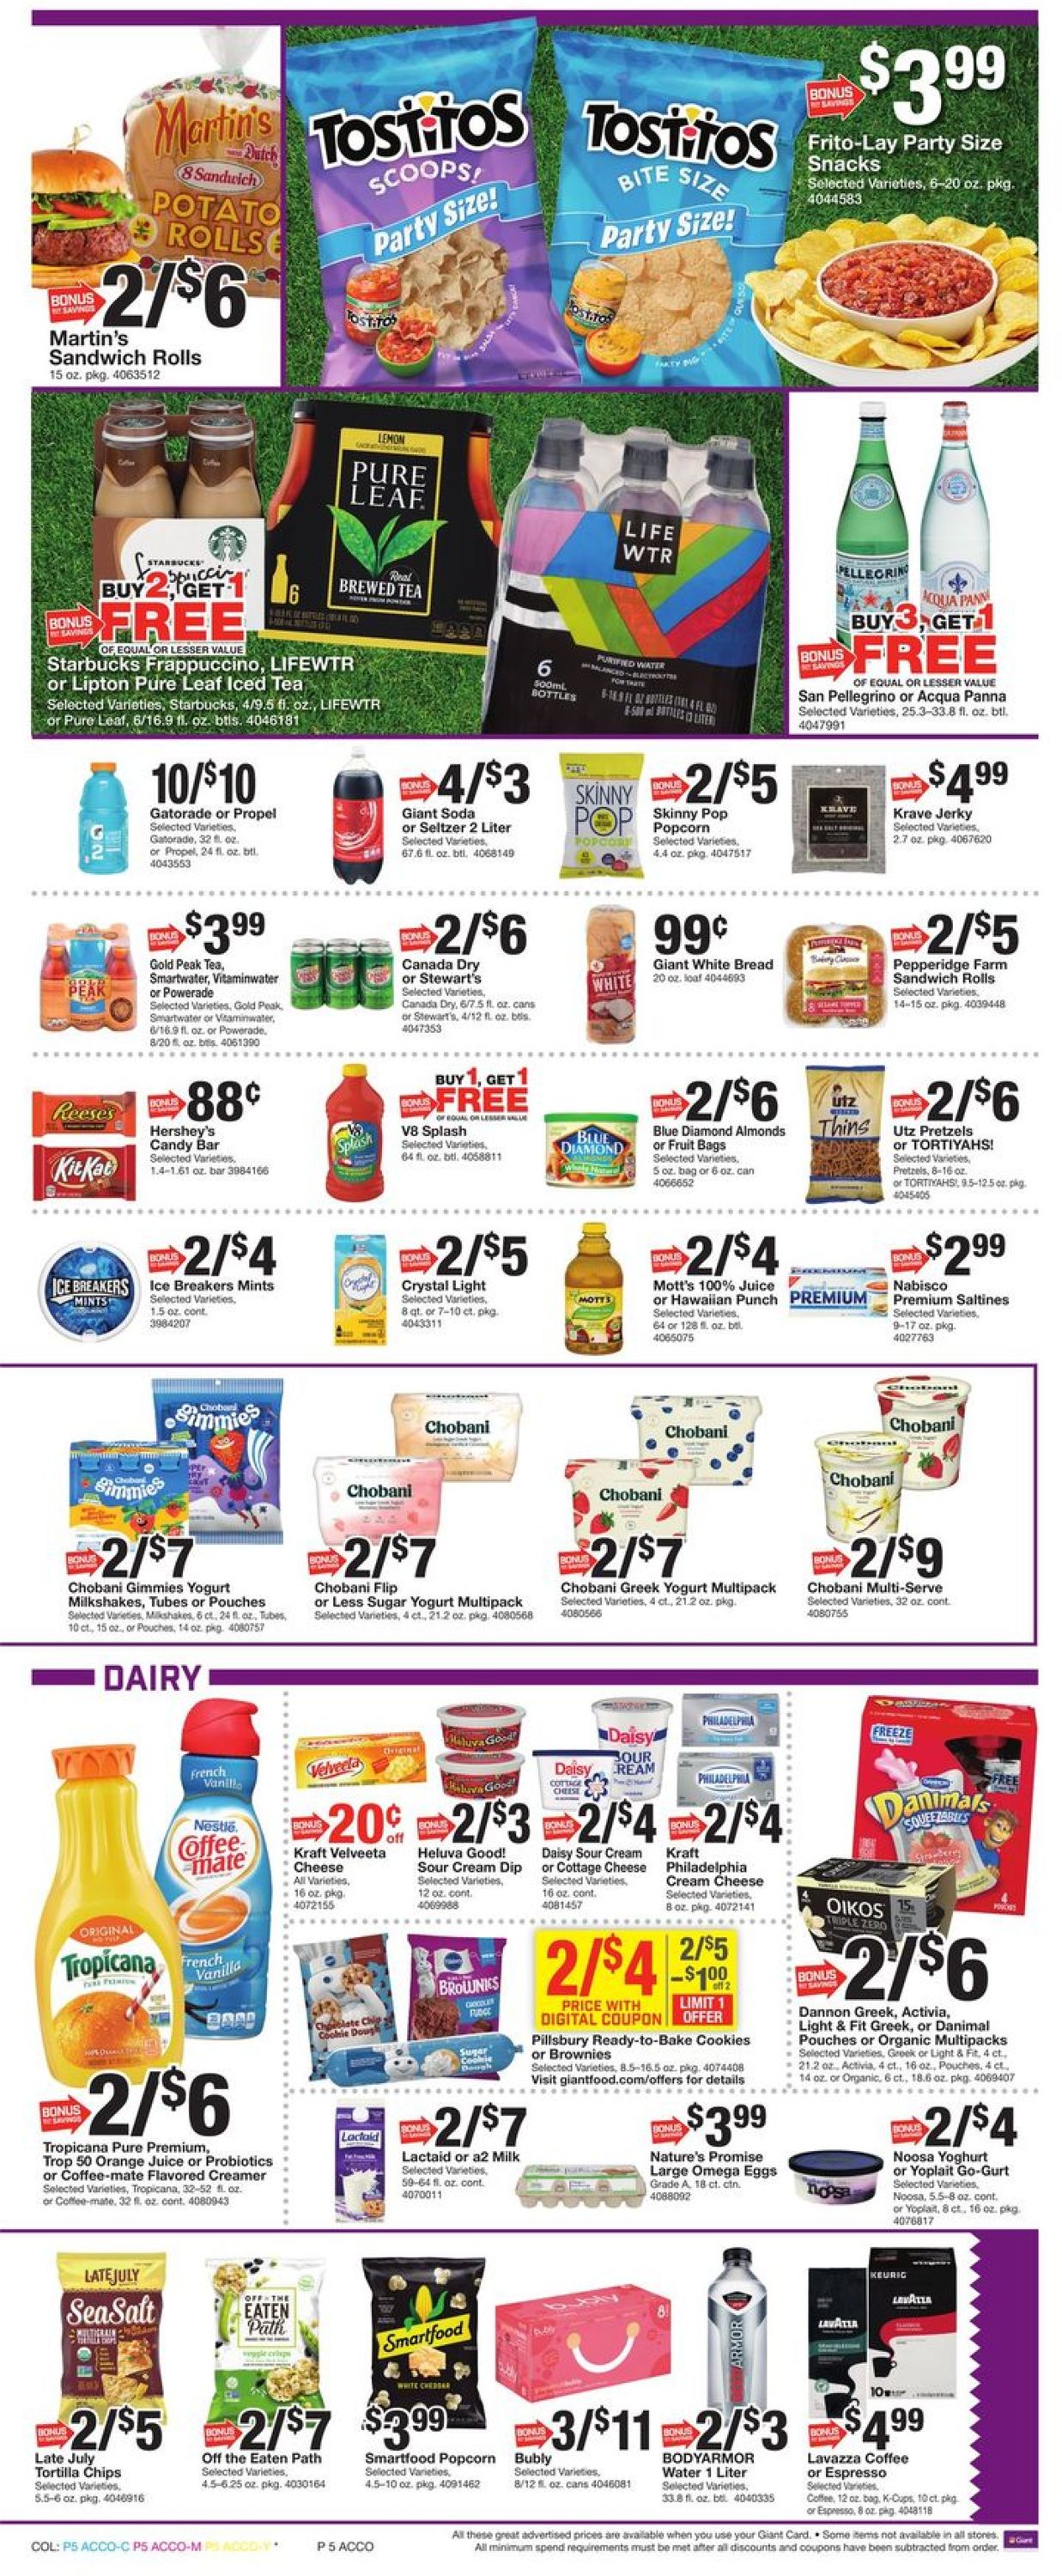 Giant Food Ad from 01/31/2020